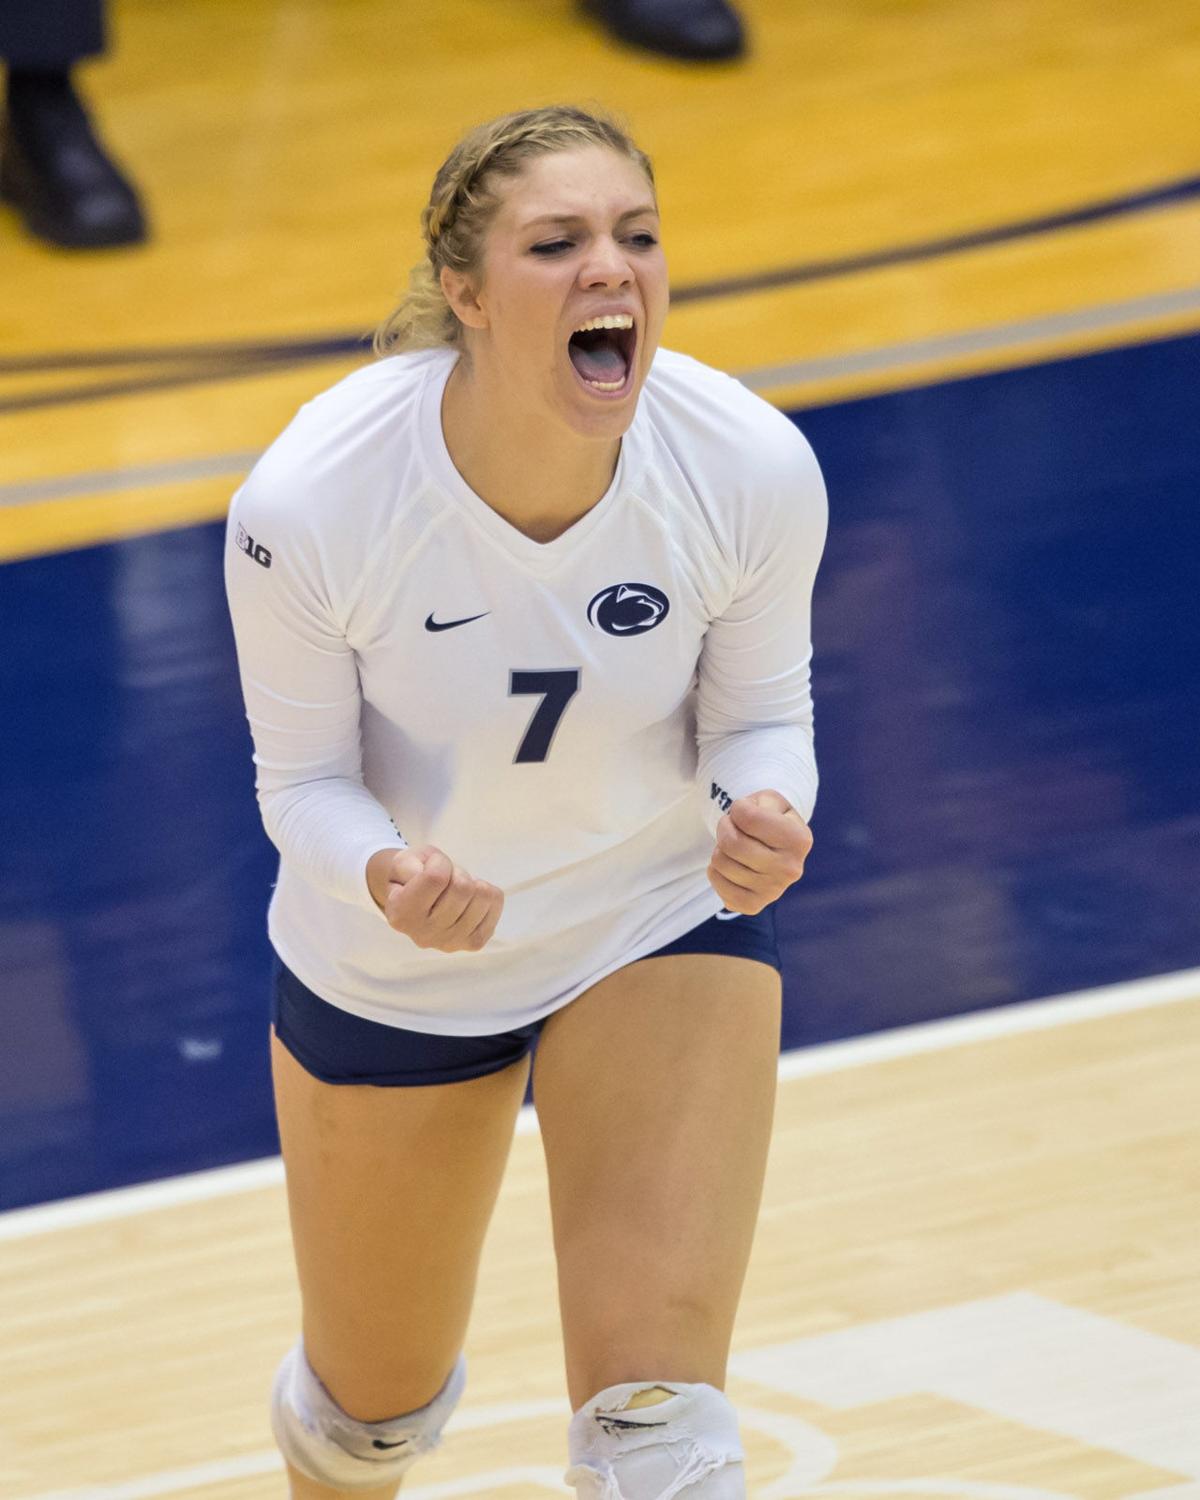 Penn State women’s volleyball’s Abby Detering feels at home in her